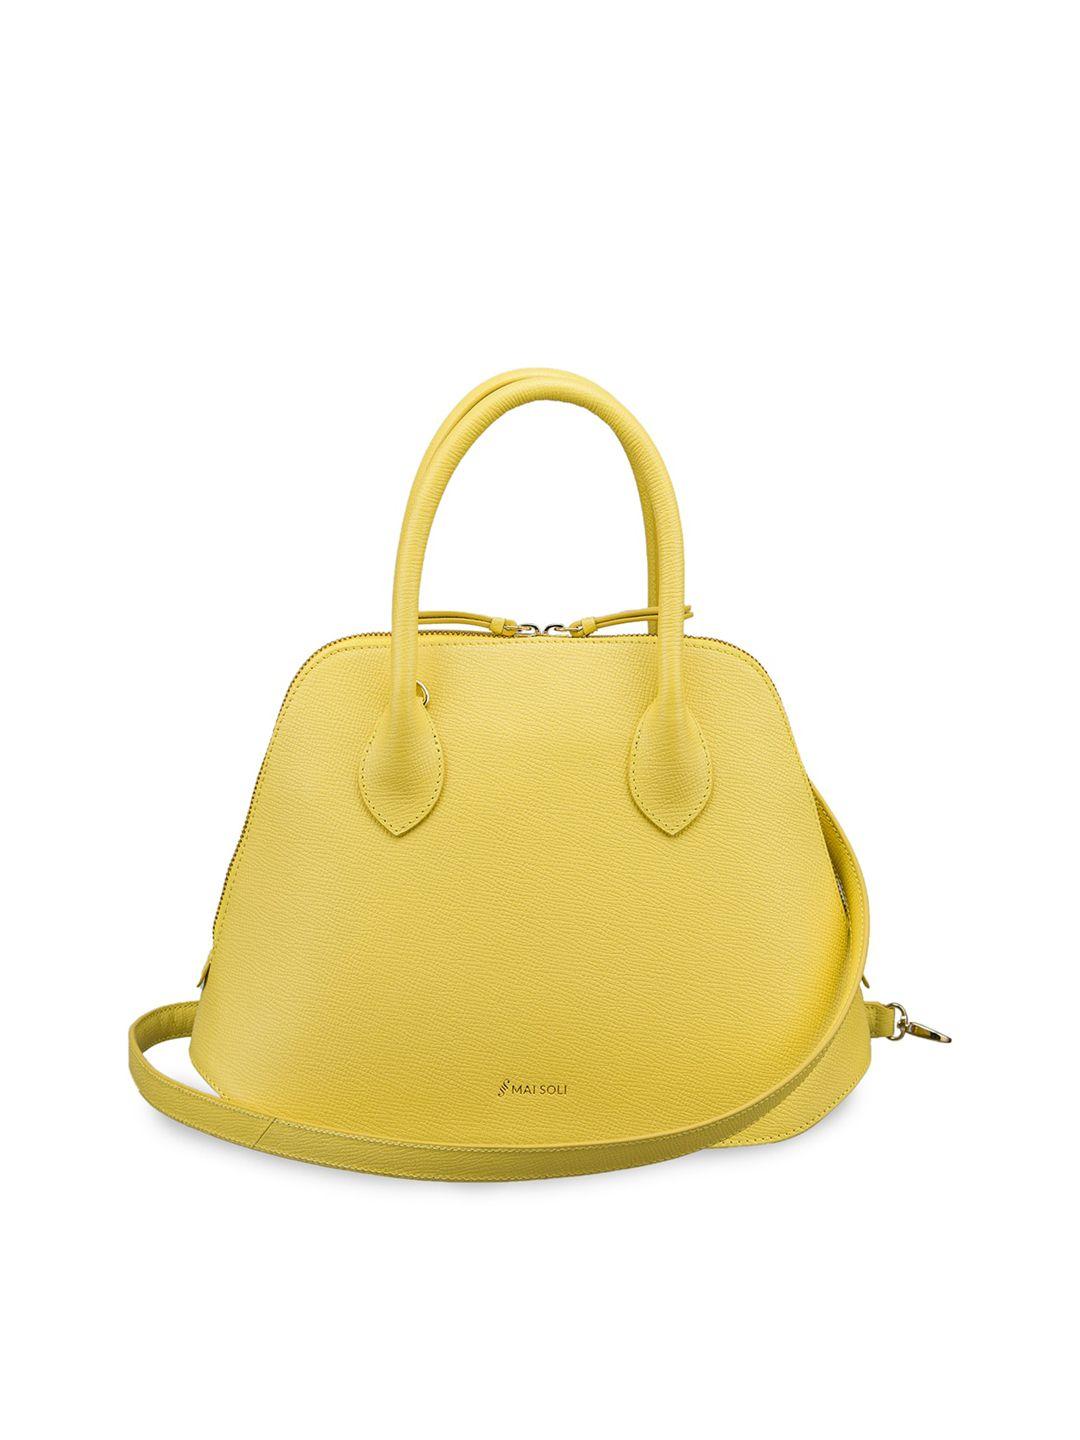 mai soli yellow leather structured satchel